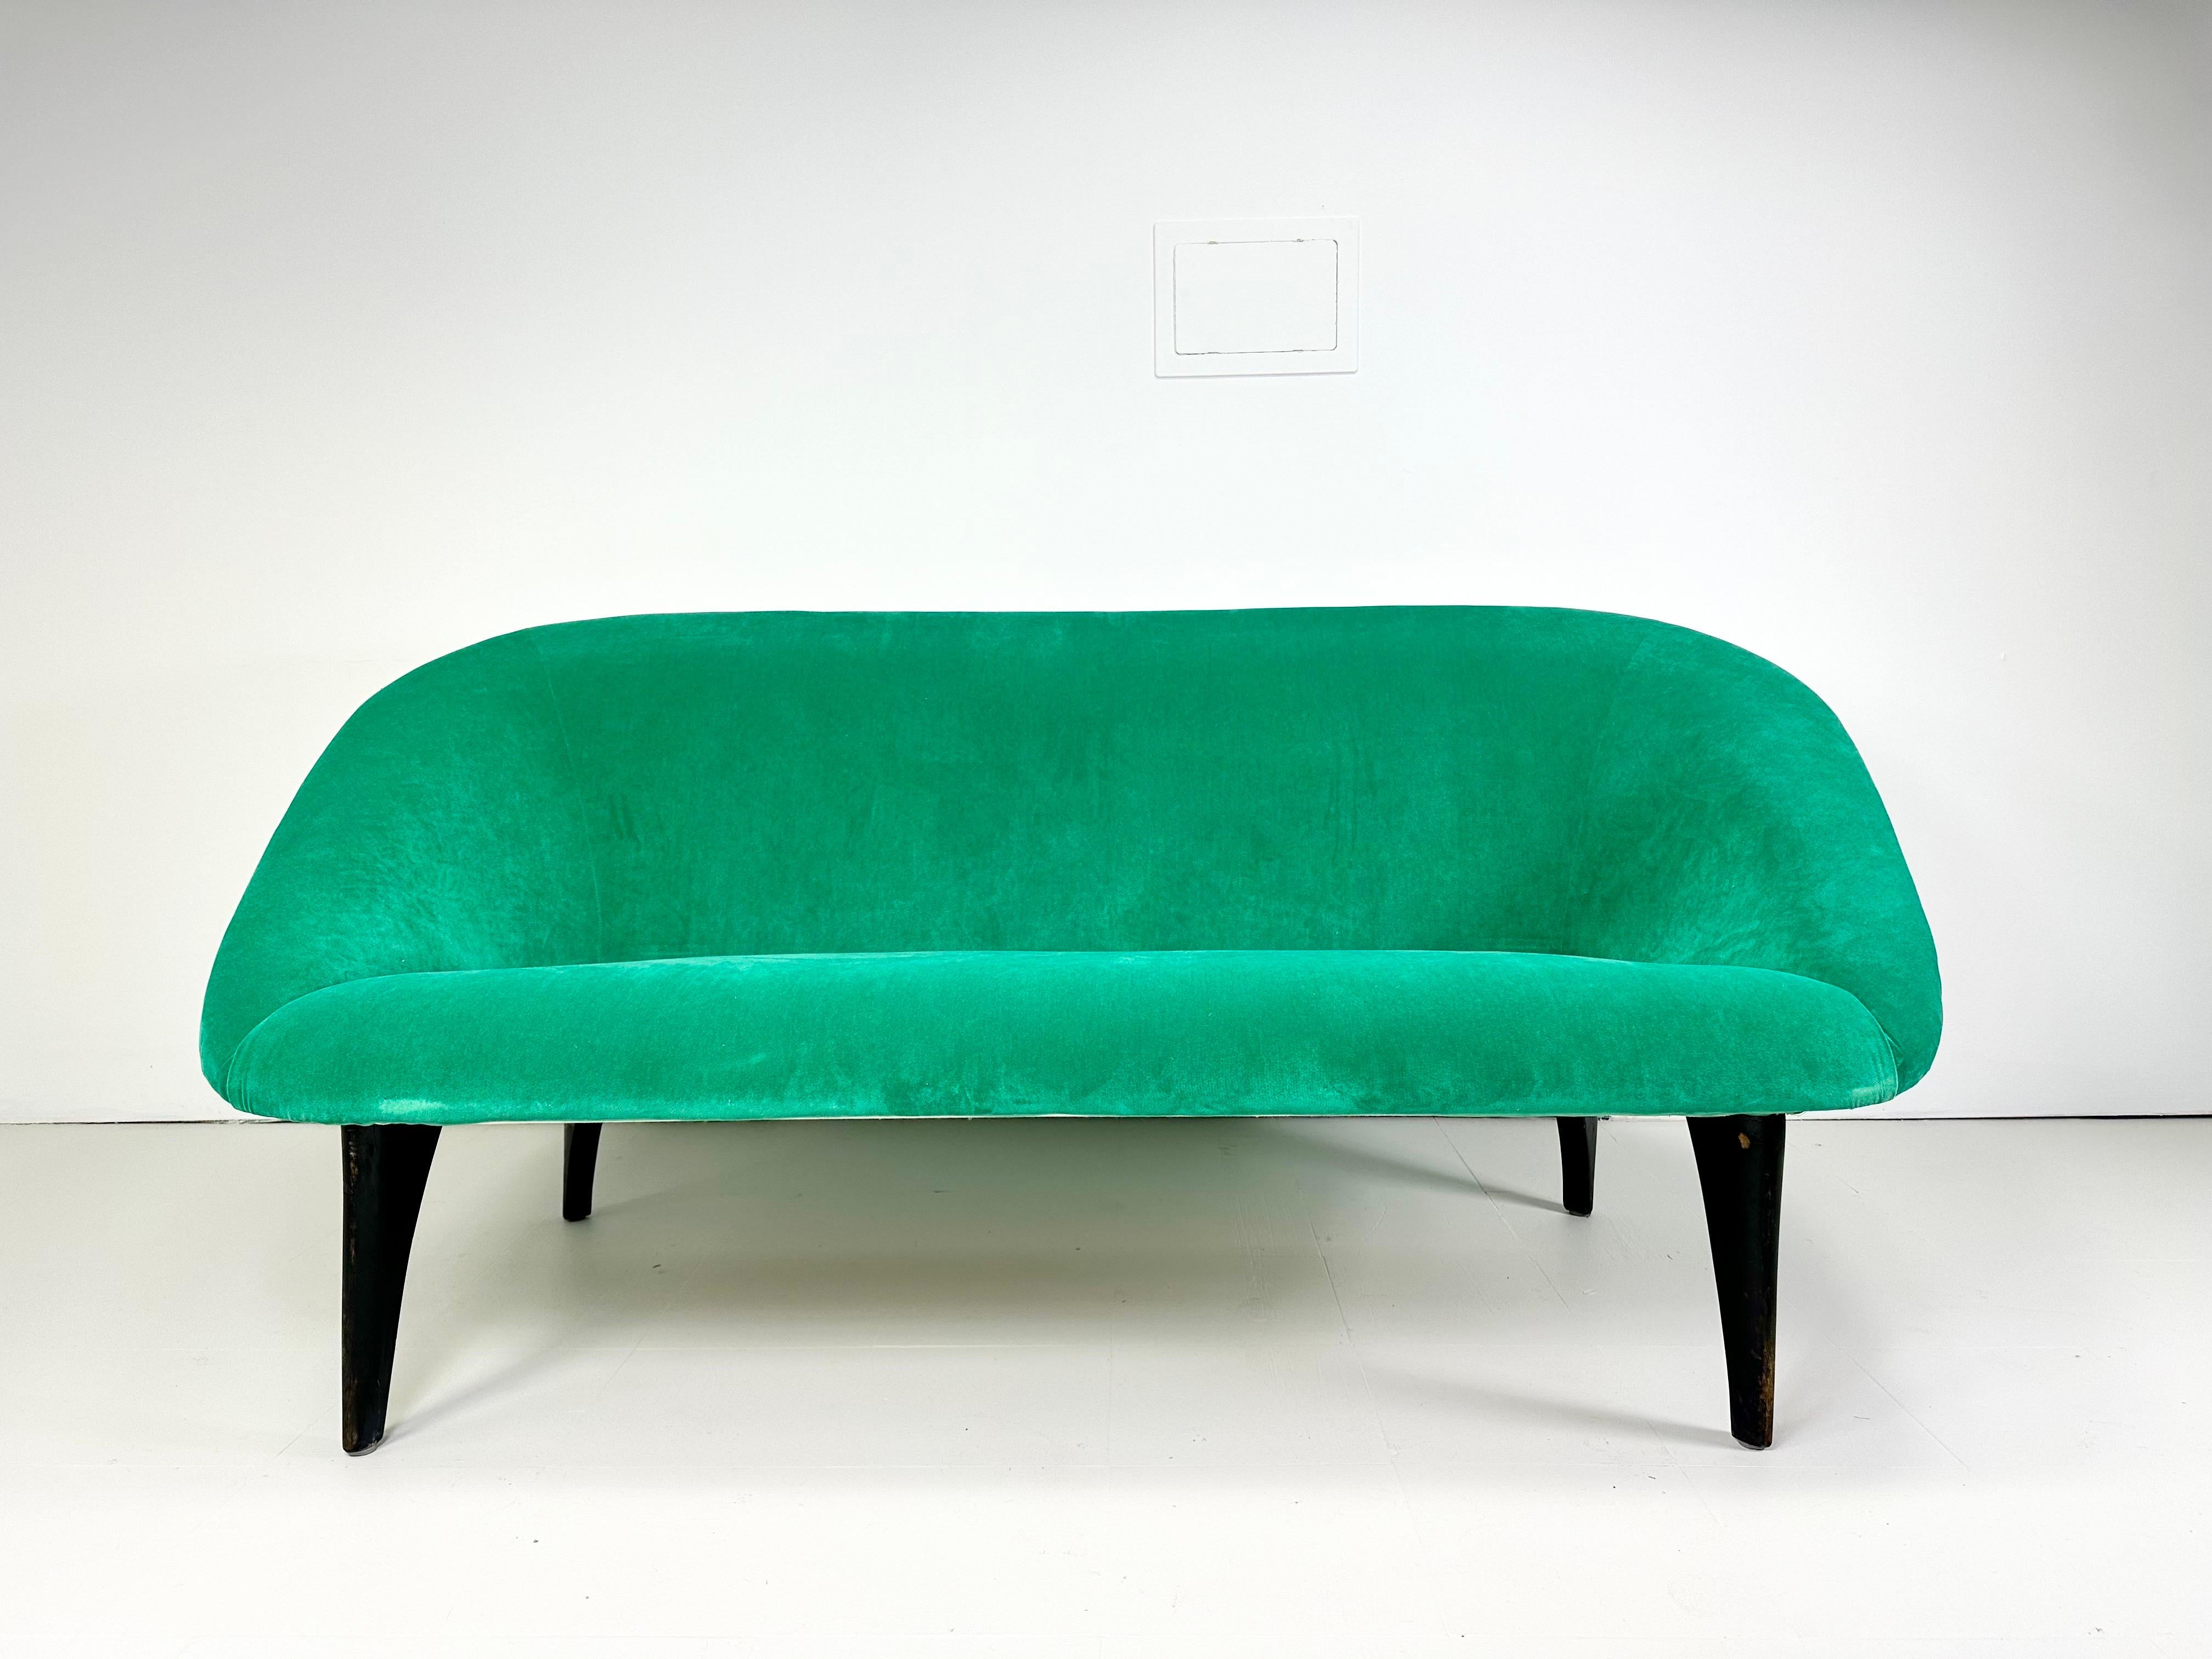 Arne Norell “Lido” Sofa for Westbergs. Sculptural Black Lacquered Legs Support this Unique 1960’s Sofa Form. More recent micro suede upholstery with nail head details outlining the back legs. Sweden. Unmarked